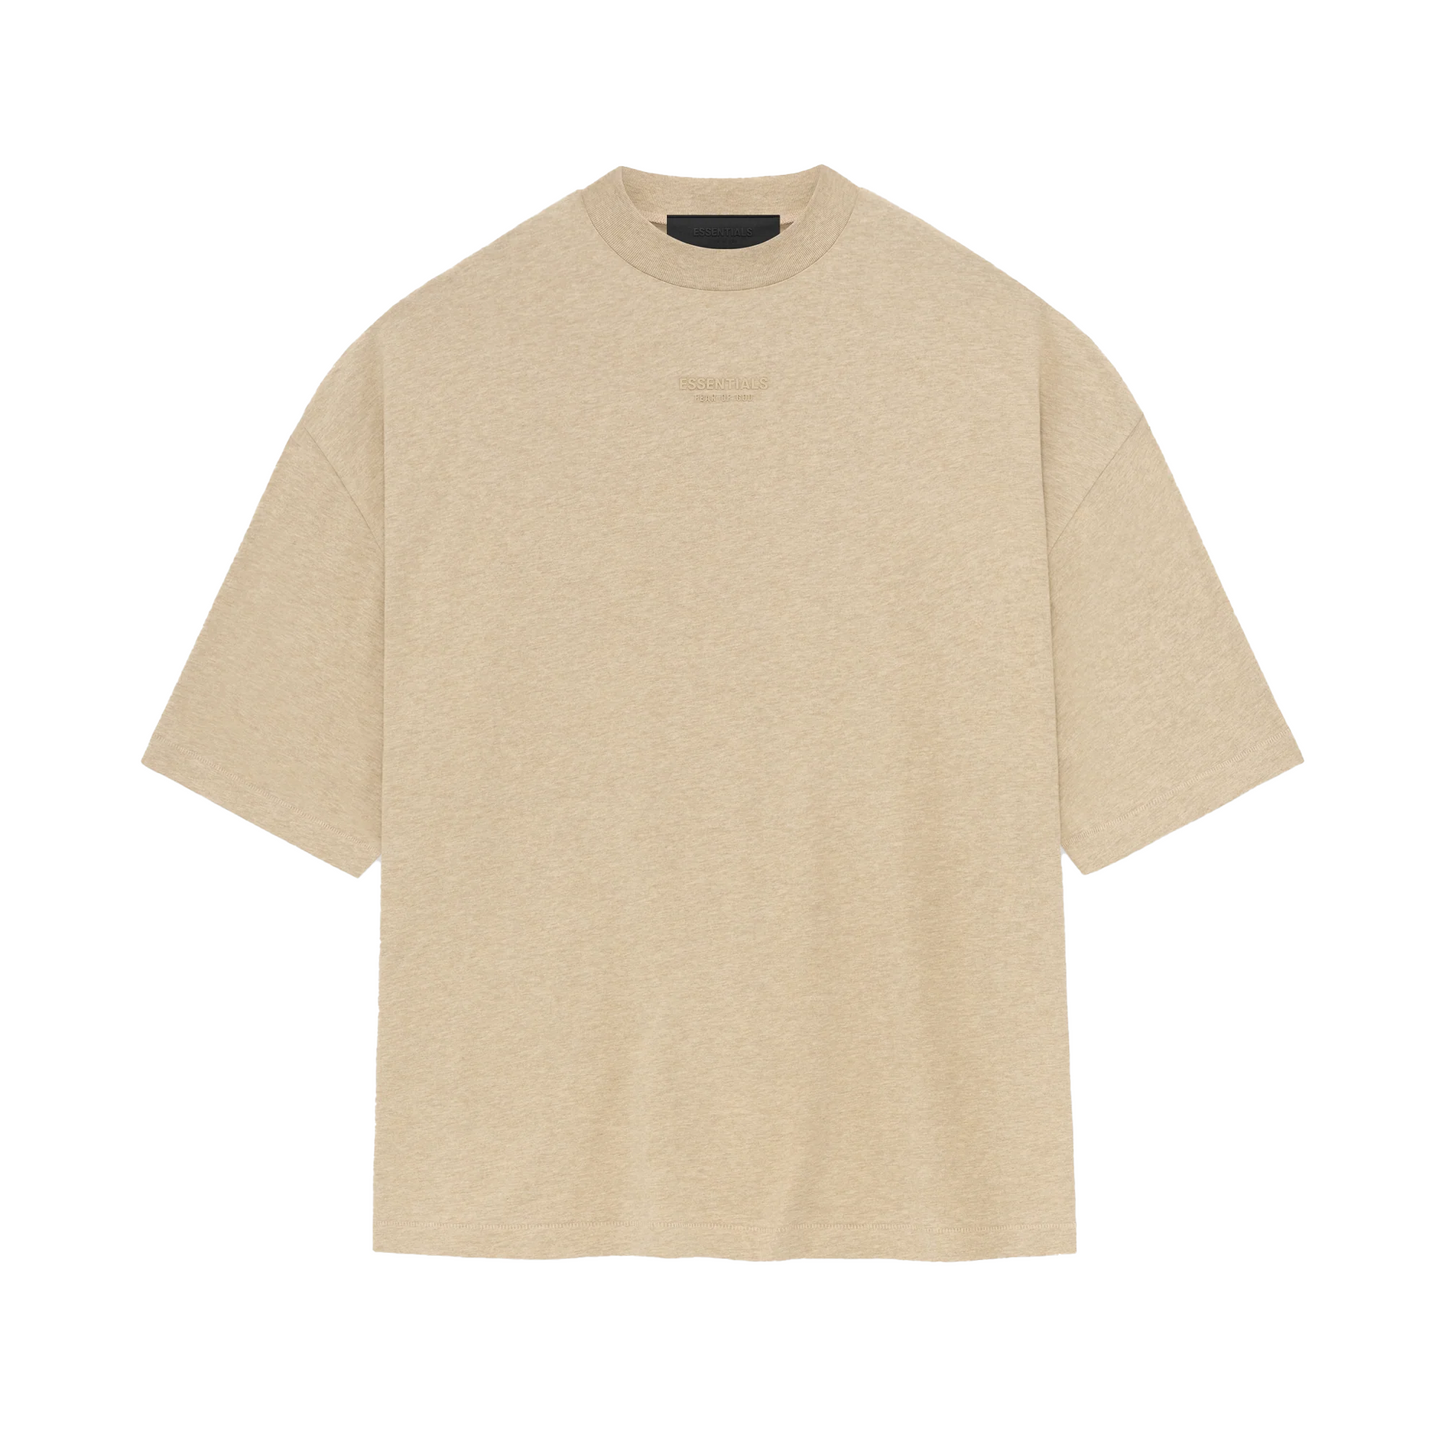 Fear of God Essentials Tee Gold Heather Fear of God